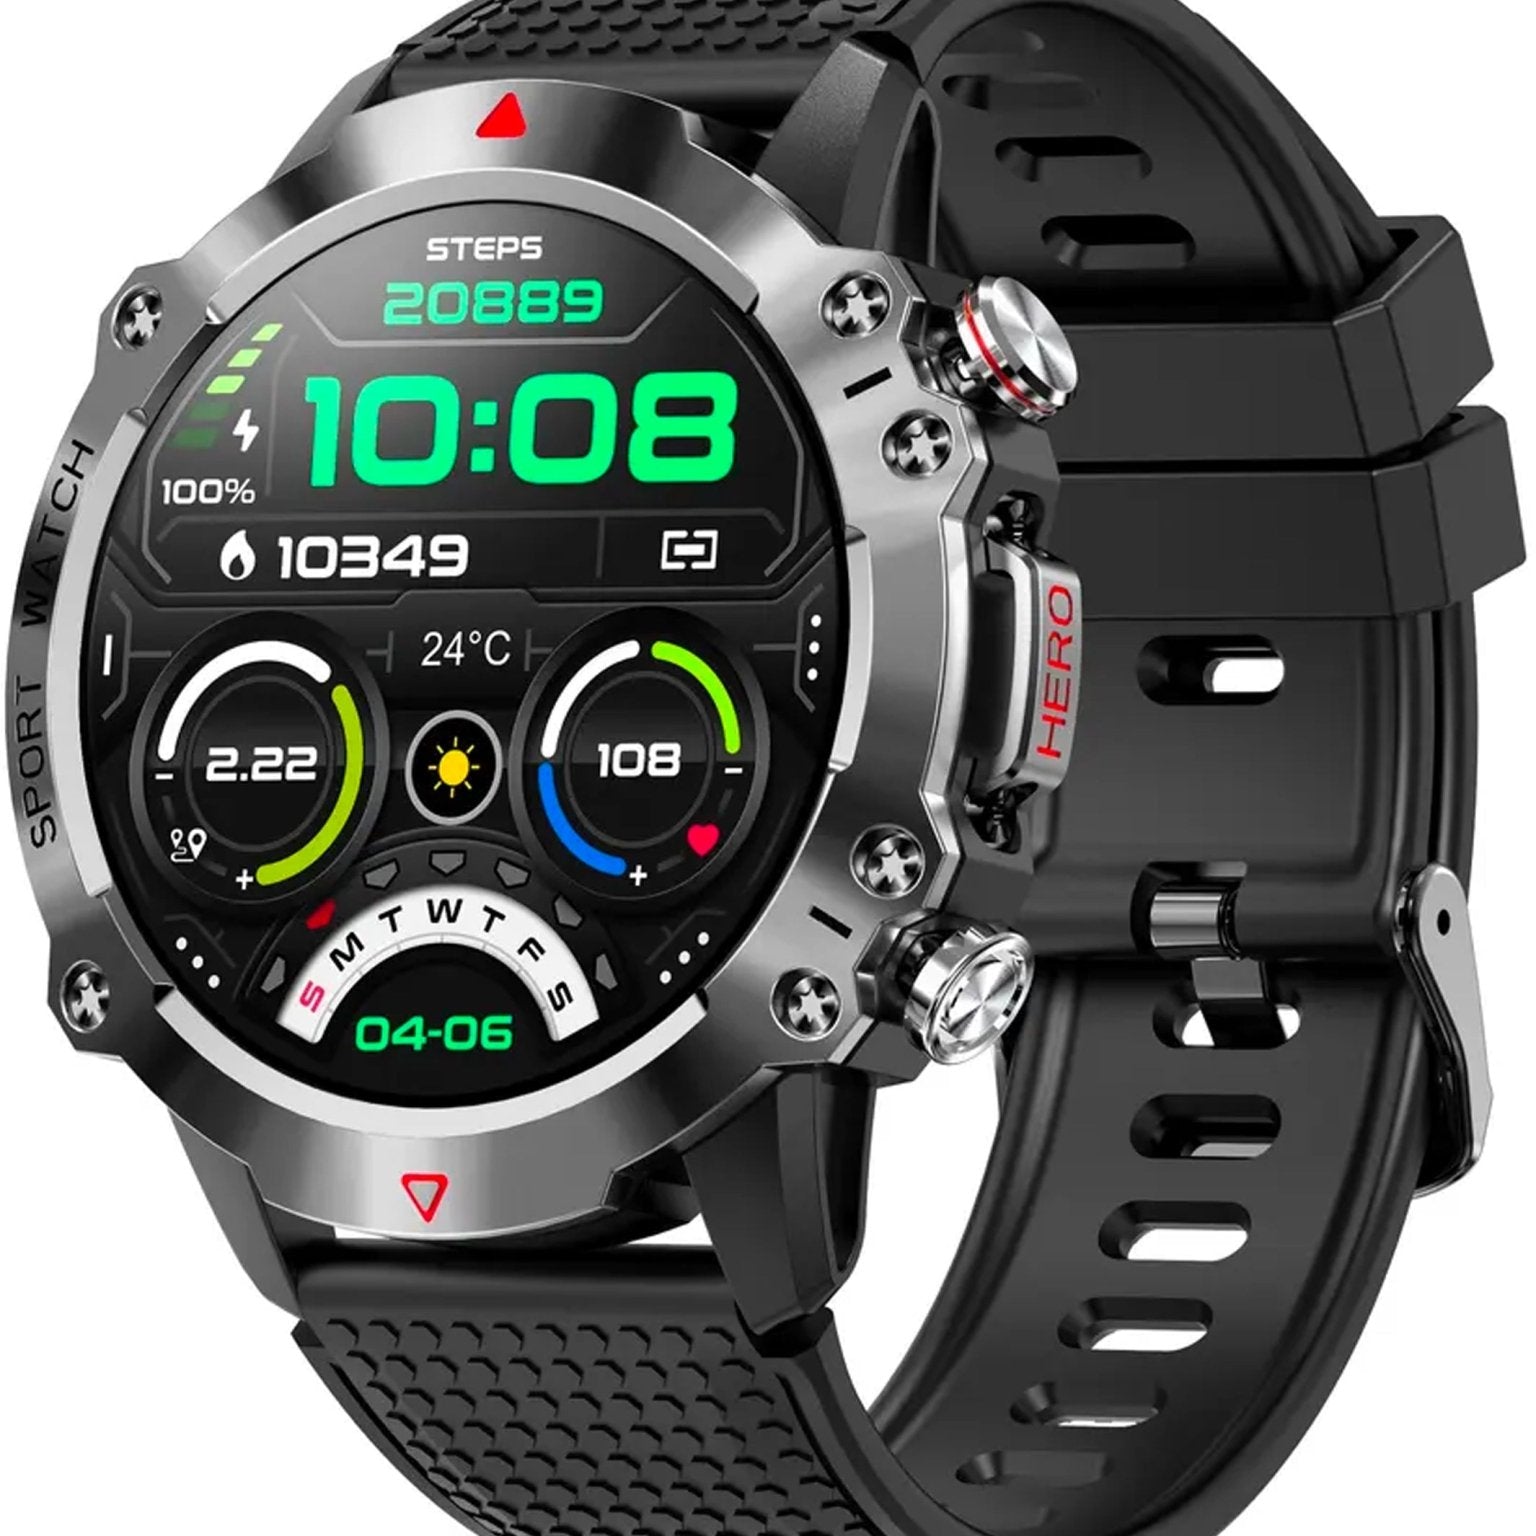 4elementsclothingTelsaTELSA UK - Waterproof Smart Watch T410 Sports & fitness digital Watch military style mens with Touch Screen display, Fitness Watch, Smart Watch for men IOS & AndroidWatch5060976970351